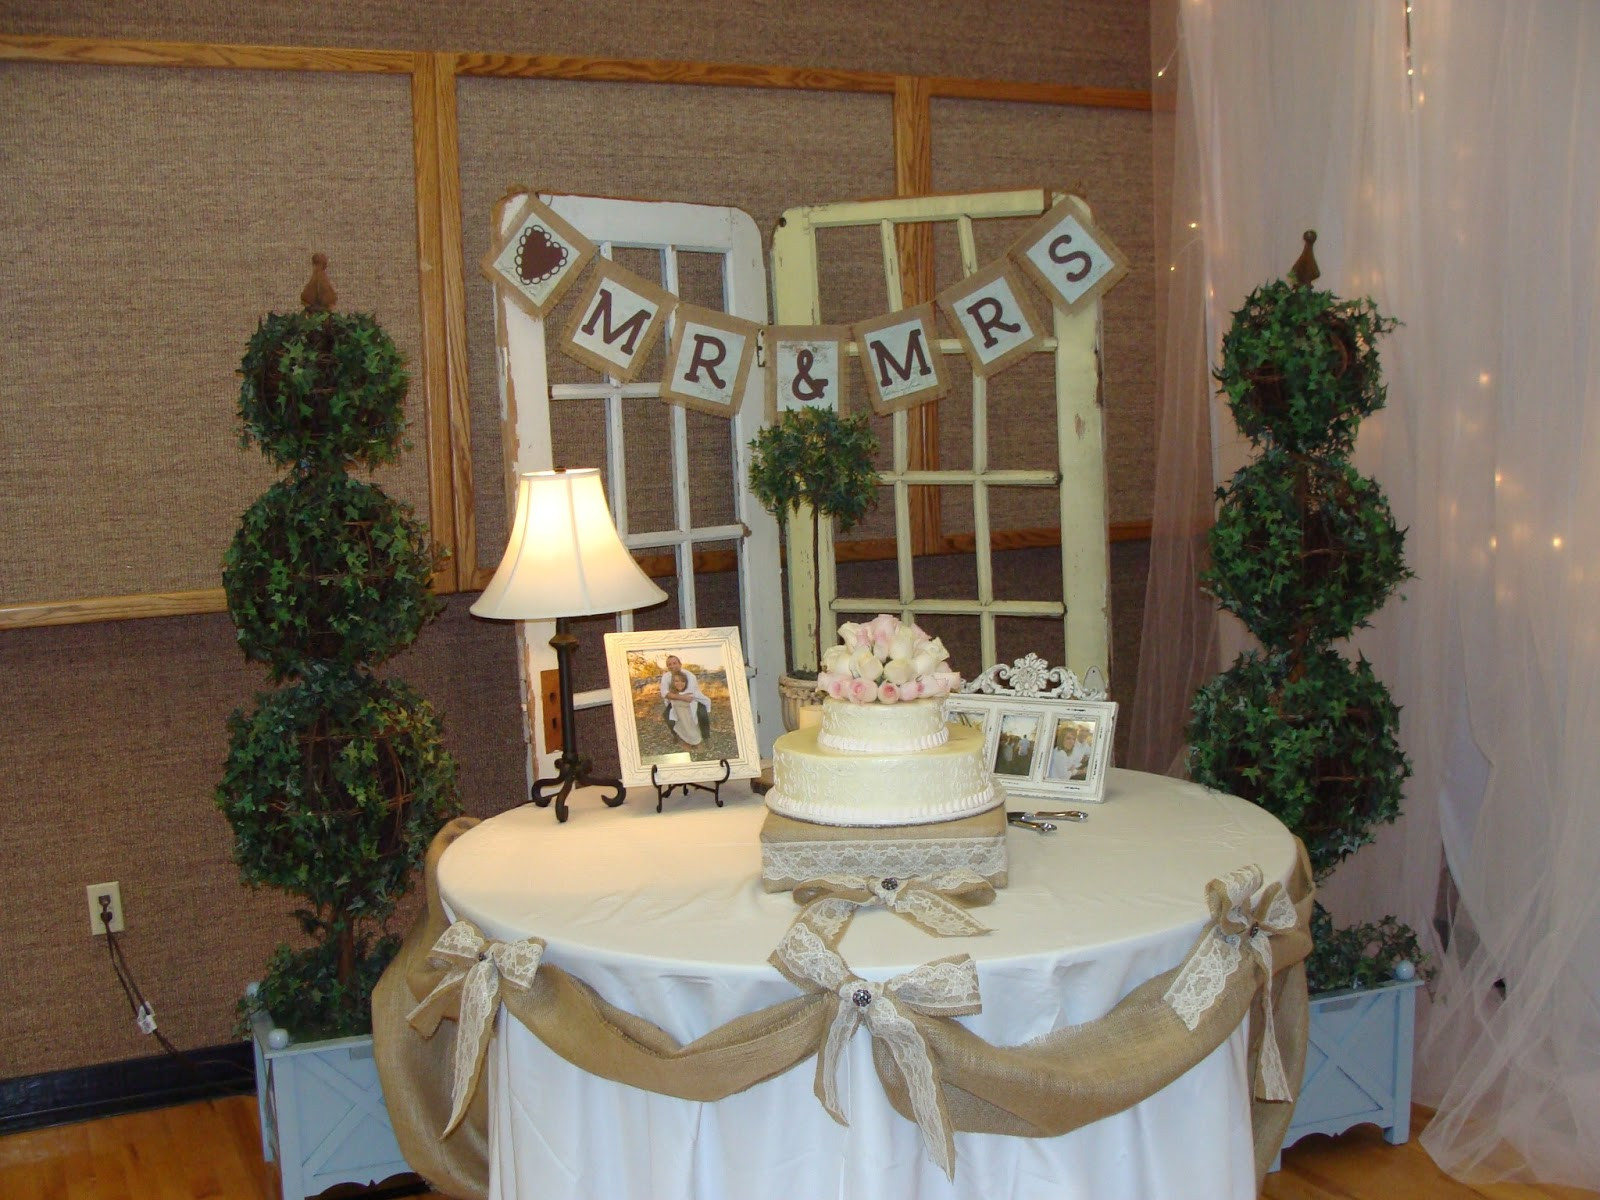 Wedding Cake Table Decoration Ideas
 Strong Armor Burlap and Lace Wedding